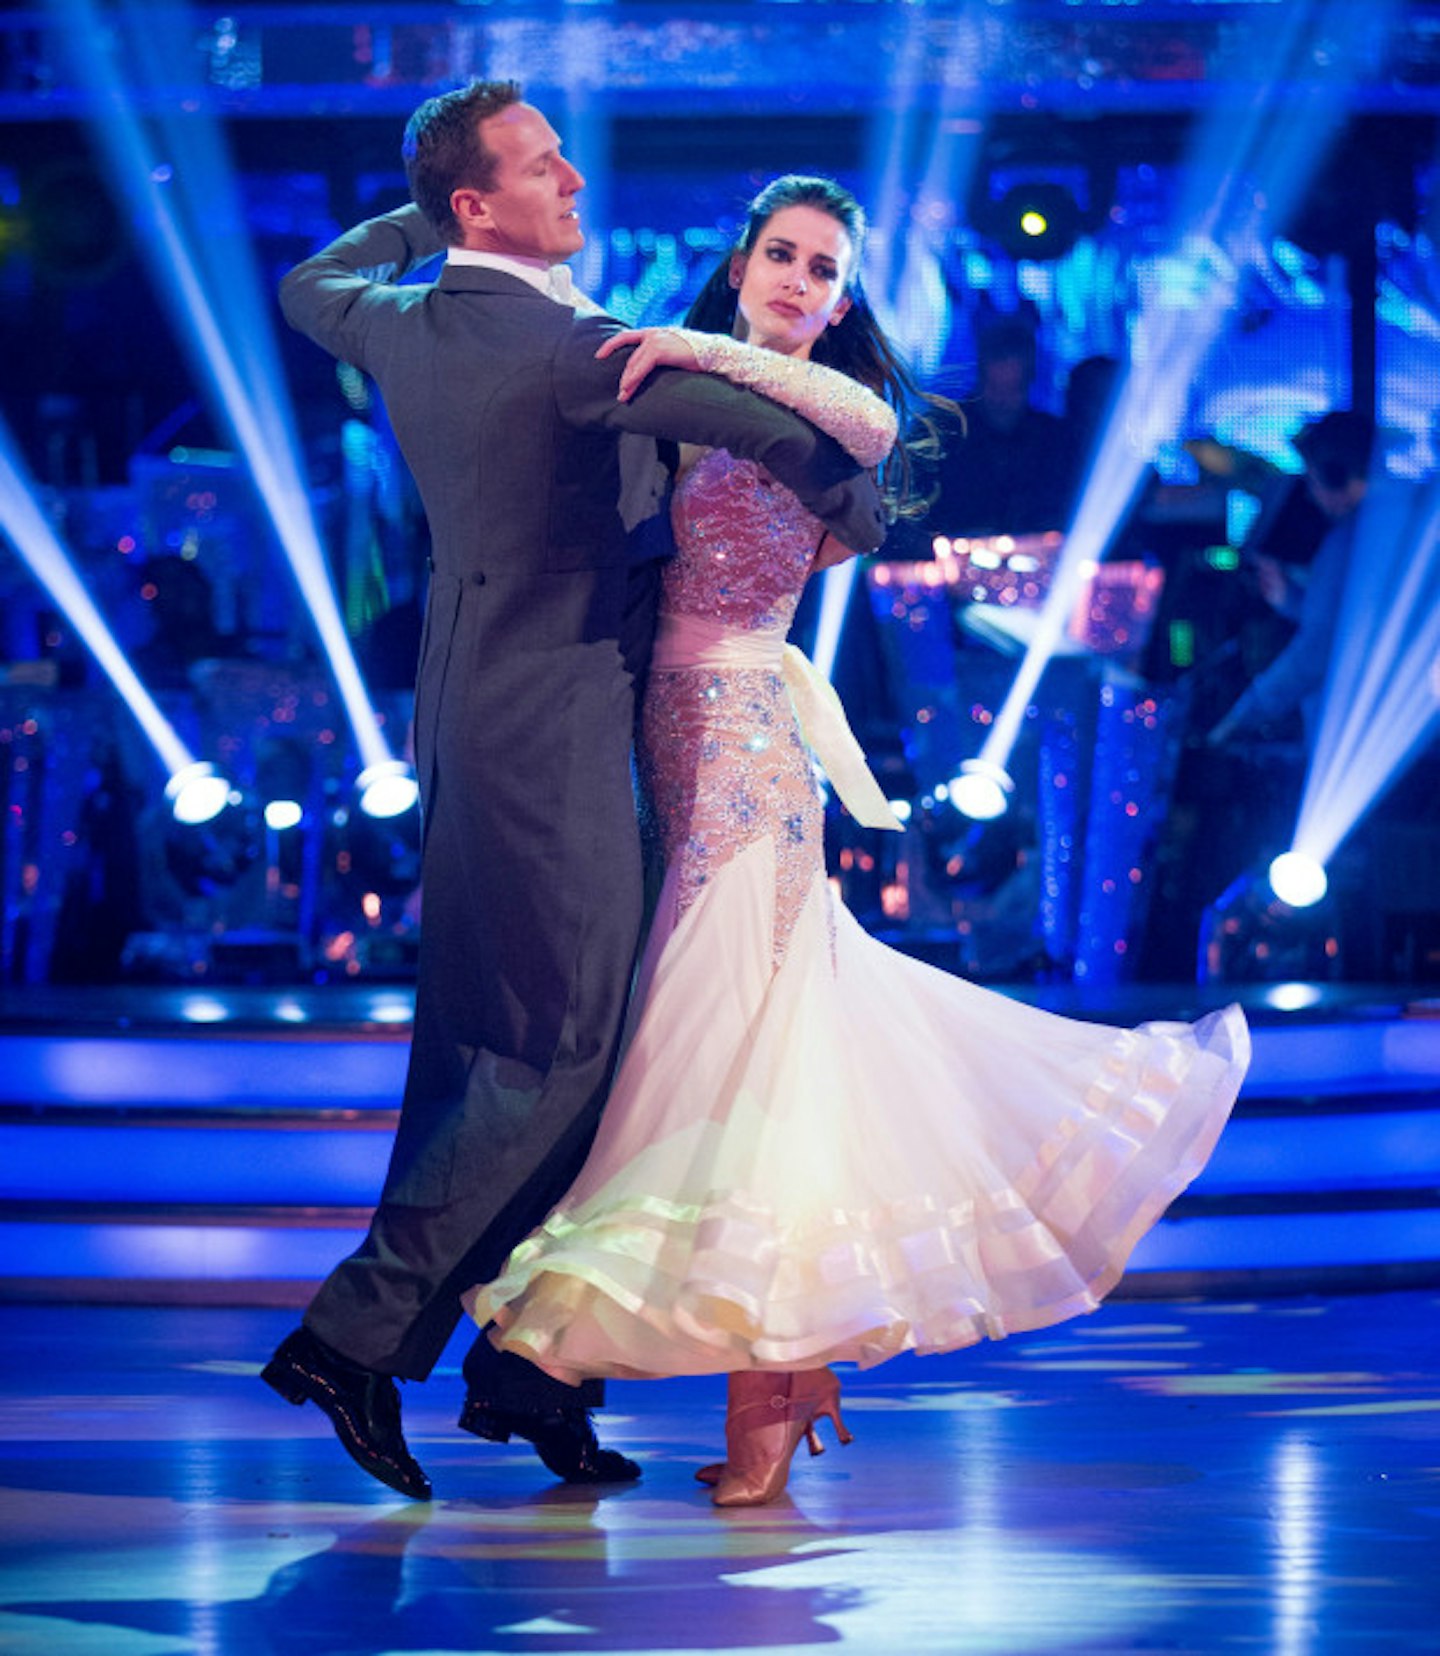 Kirsty Gallacher and Brendan Cole